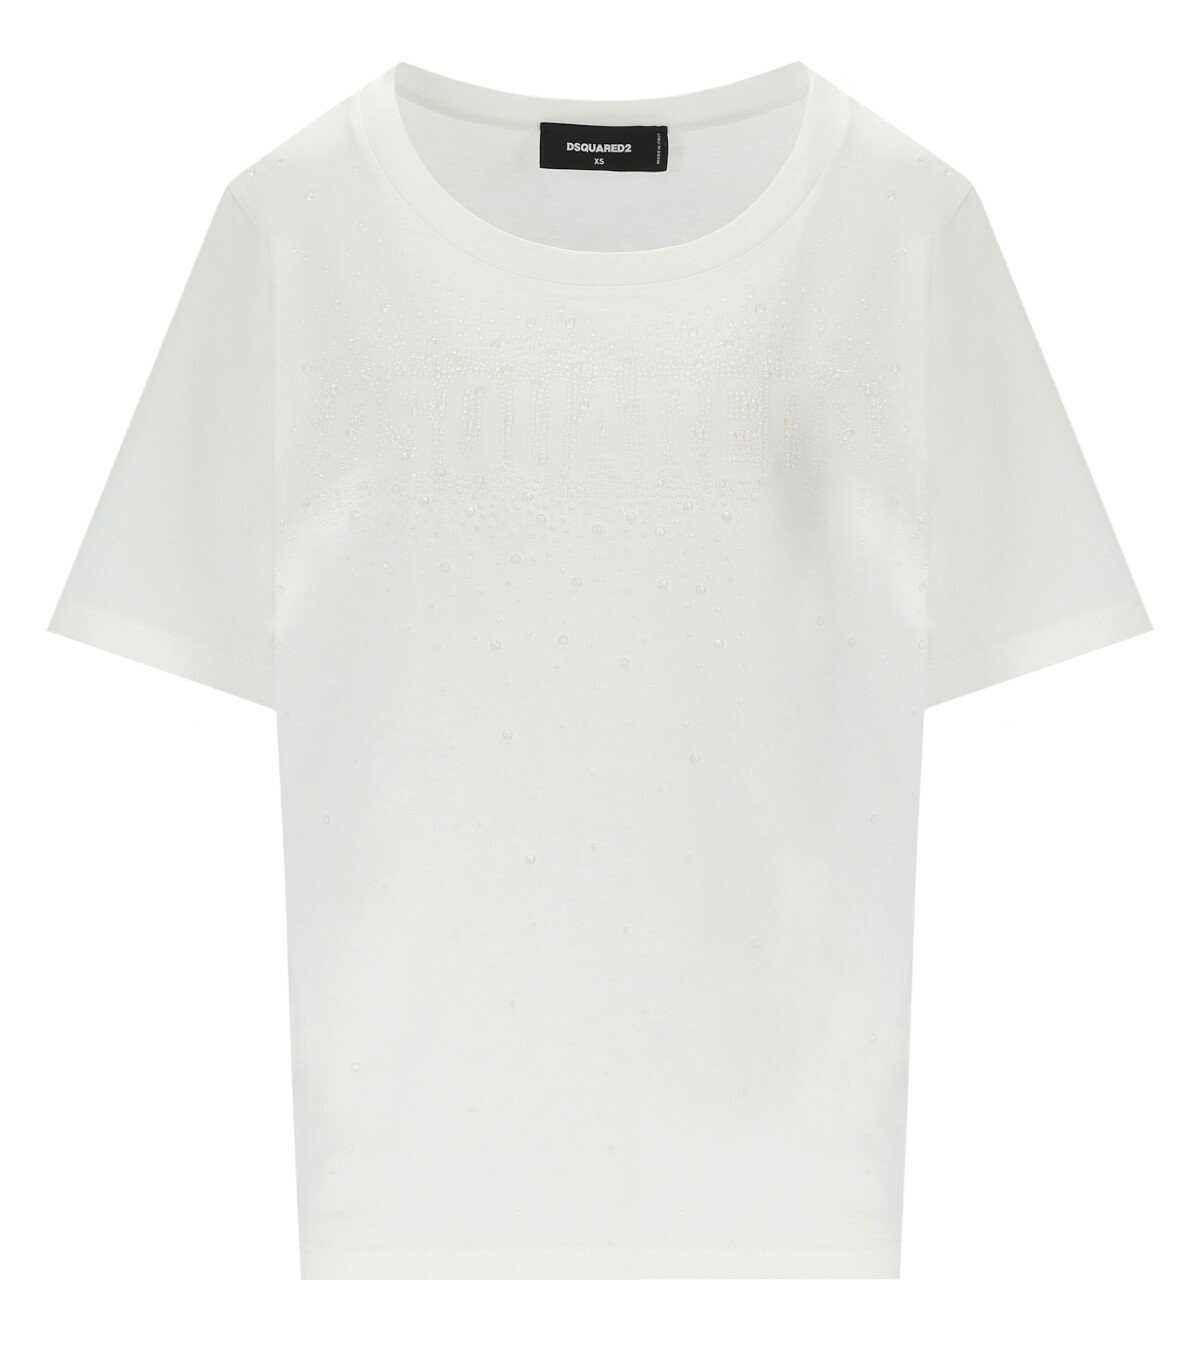 Poze DSQUARED2 DSQUARED2 EASY FIT WHITE T-SHIRT WITH RHINESTONES White b-mall.ro 